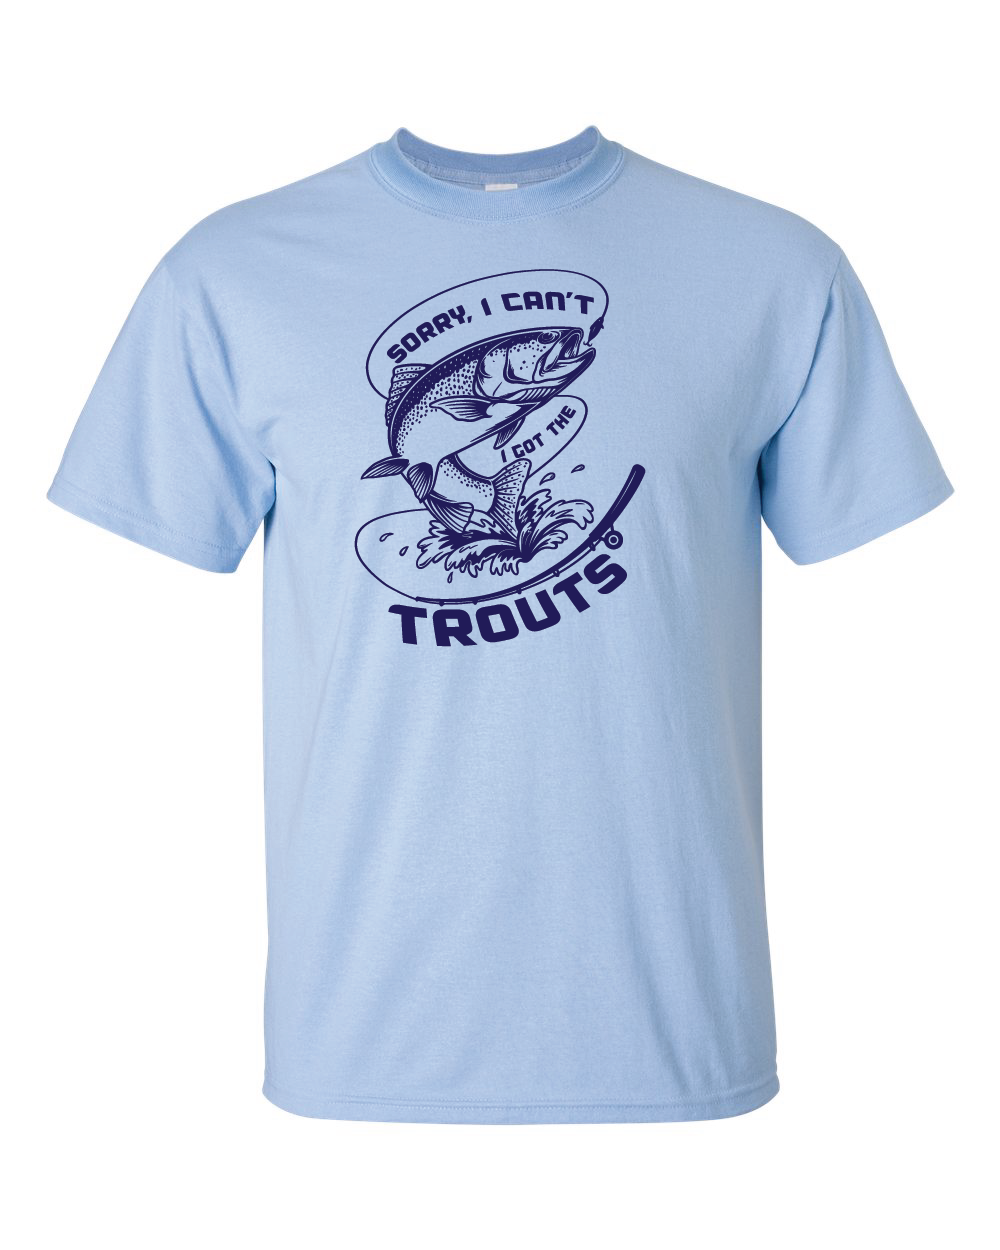 The Trouts Tee